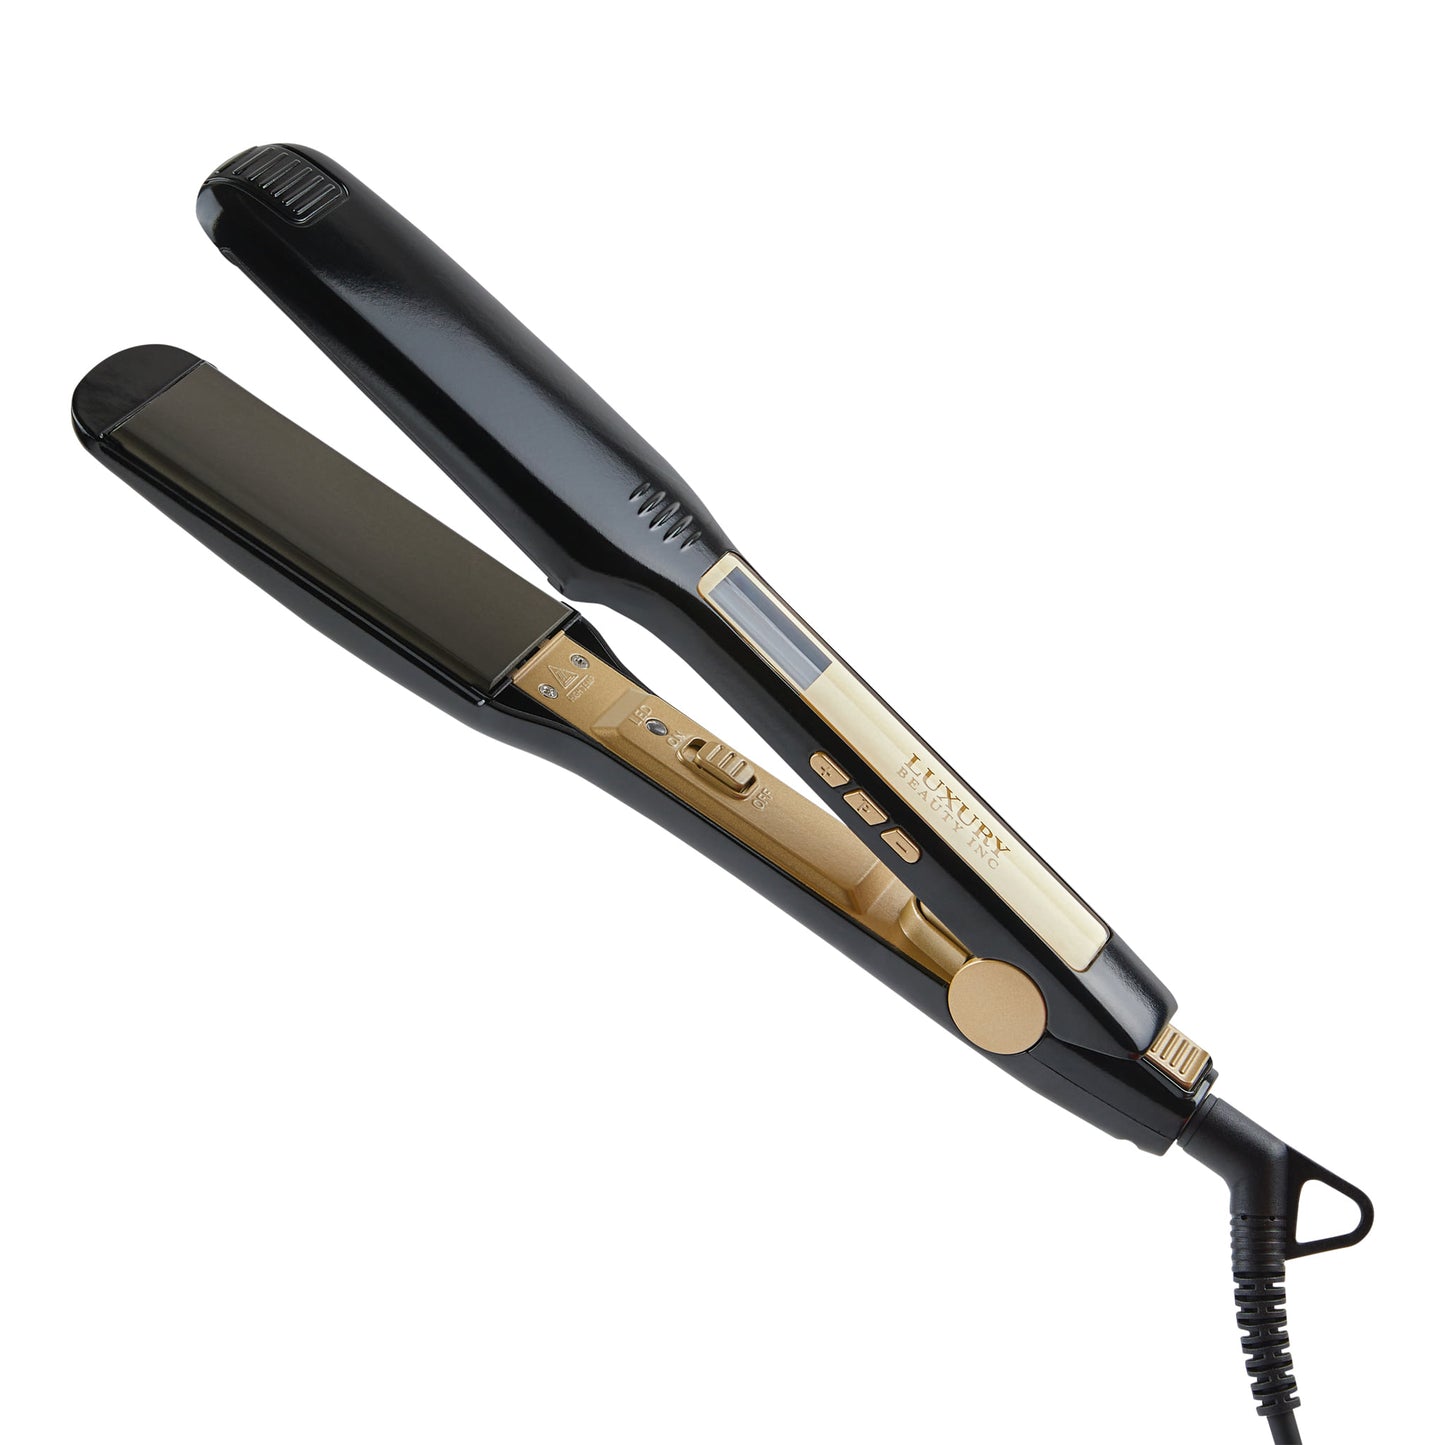 Professional Titanium 1.75Inch Flat Iron Hair Straightener & 2-in-1 Hair Styler with Digital LCD Display, Dual Voltage Instant Heating for Professional Straightening and Curling.